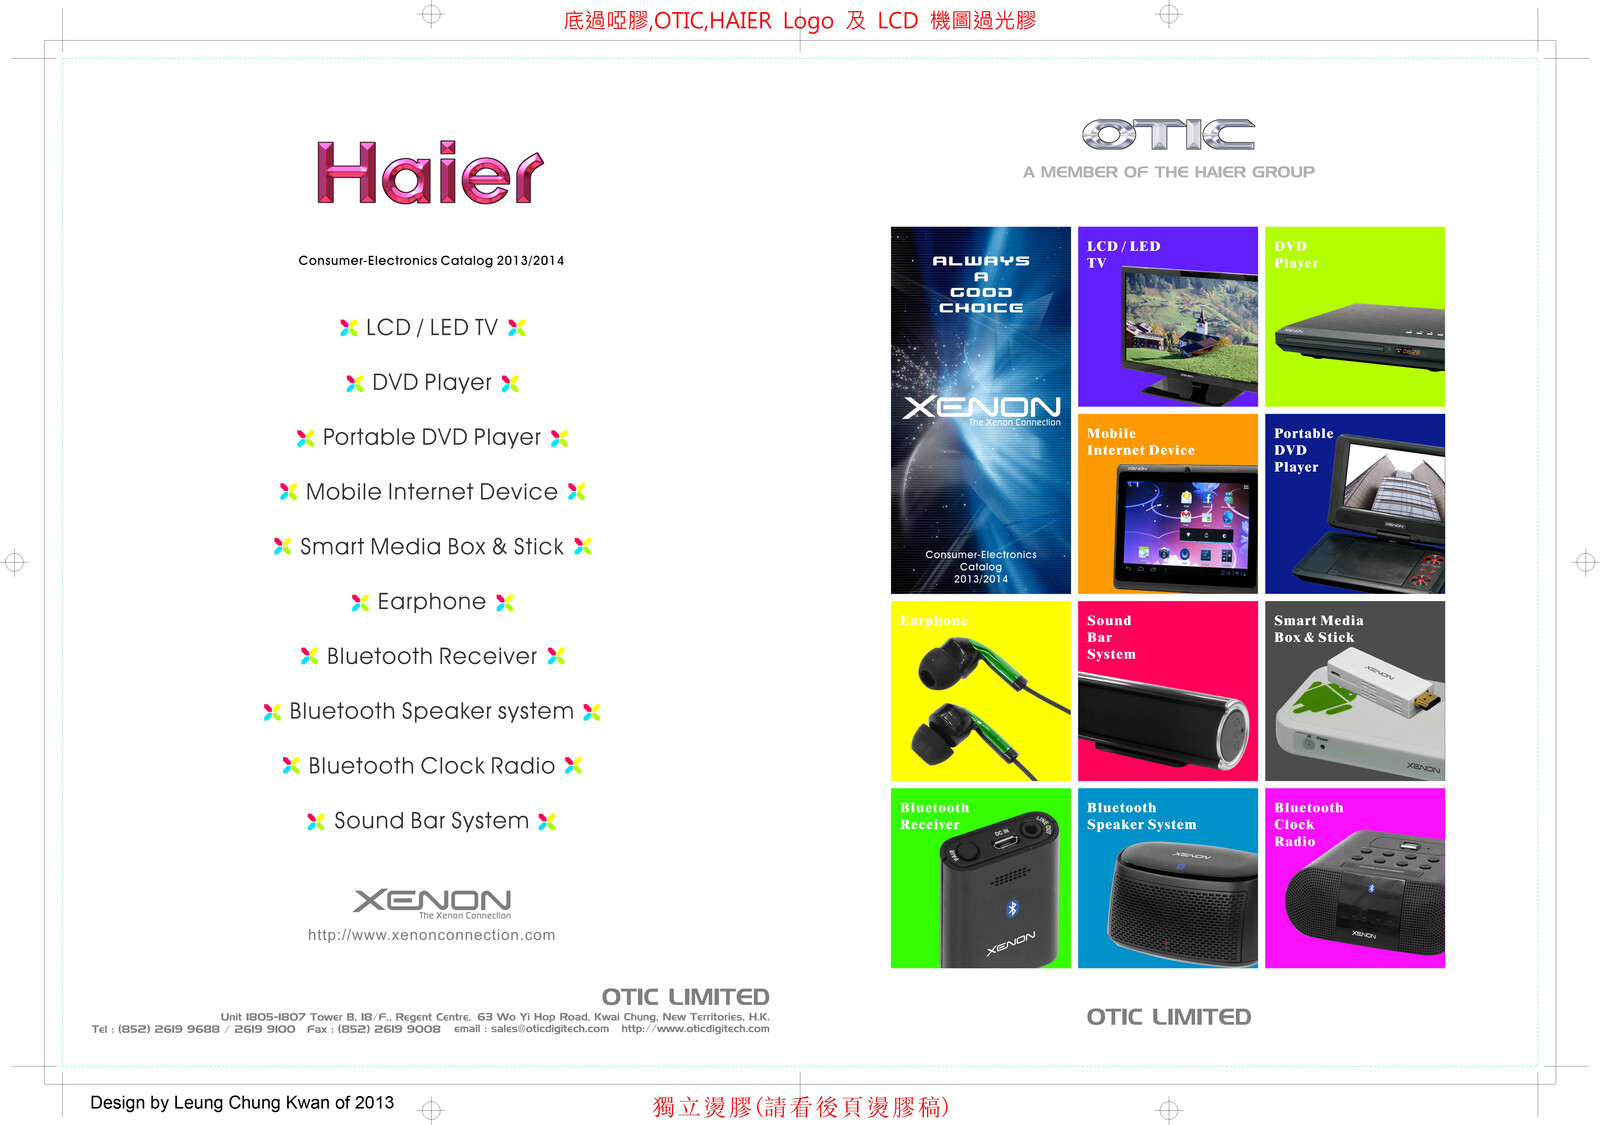 💎 Booklet Catalogue Cover | Design by Leung Chung Kwan on 2013 💎
Brand Name︰Haier / OTIC | Client︰OTIC Limited